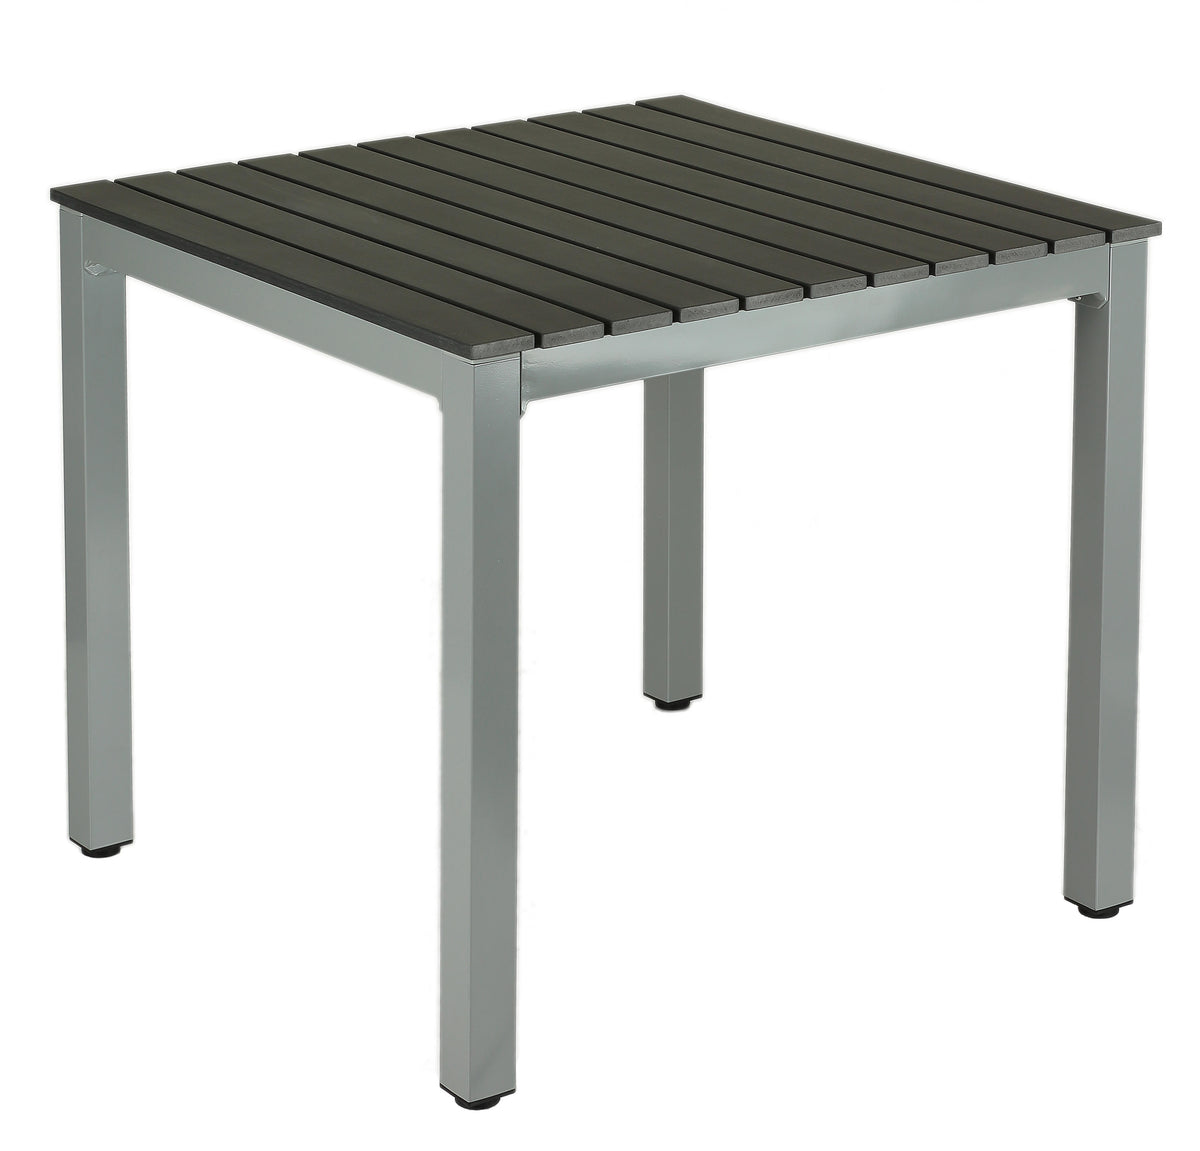 Jaxon Aluminum Outdoor Table in Poly Resin, Silver/Slate Grey